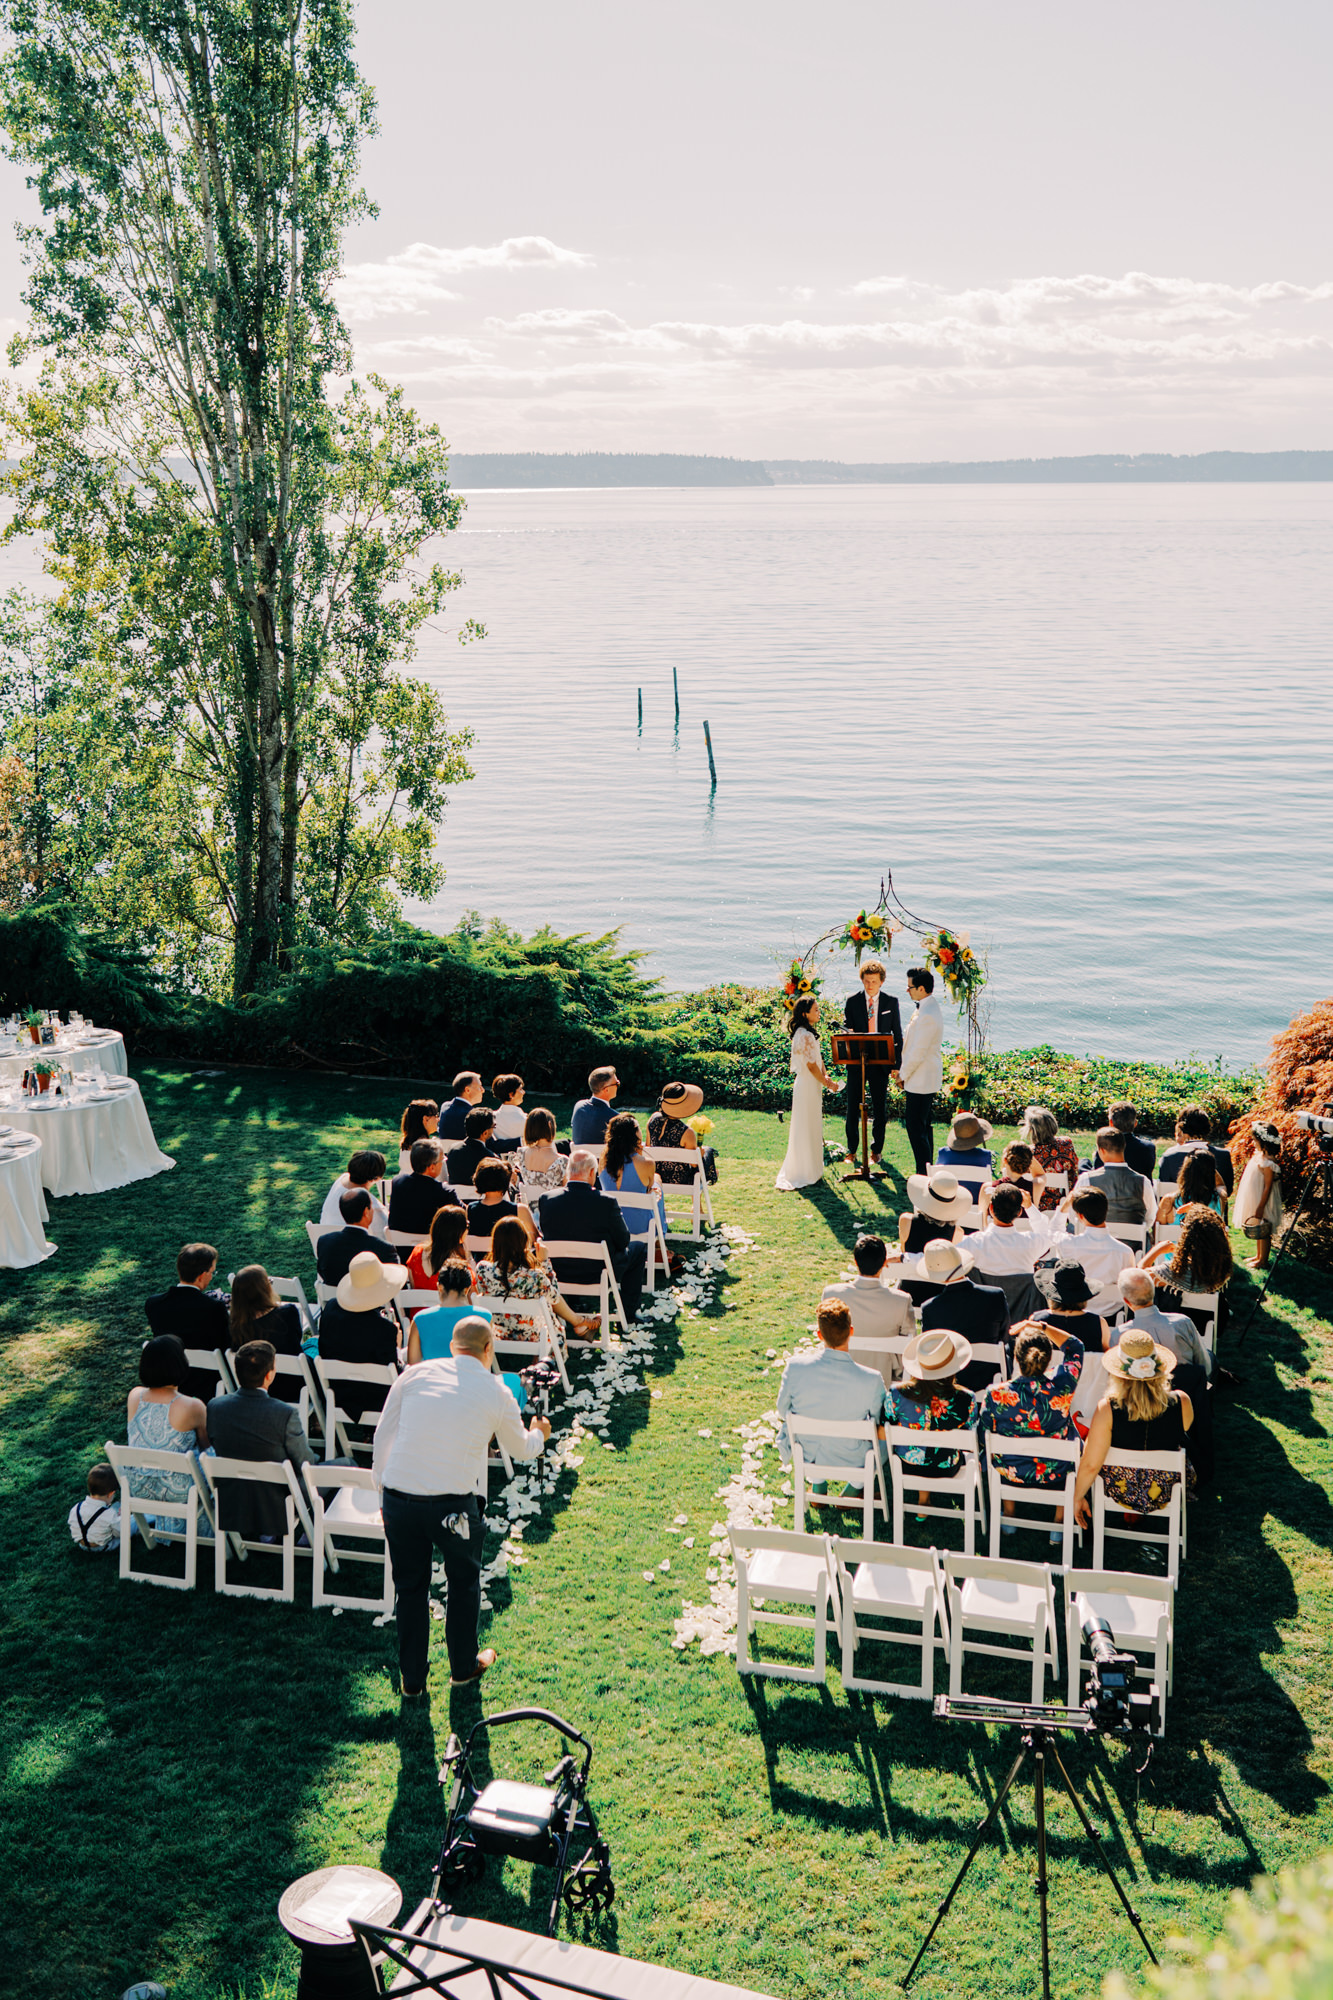 Jen and Sage getting married at their beautiful backyard garden wedding